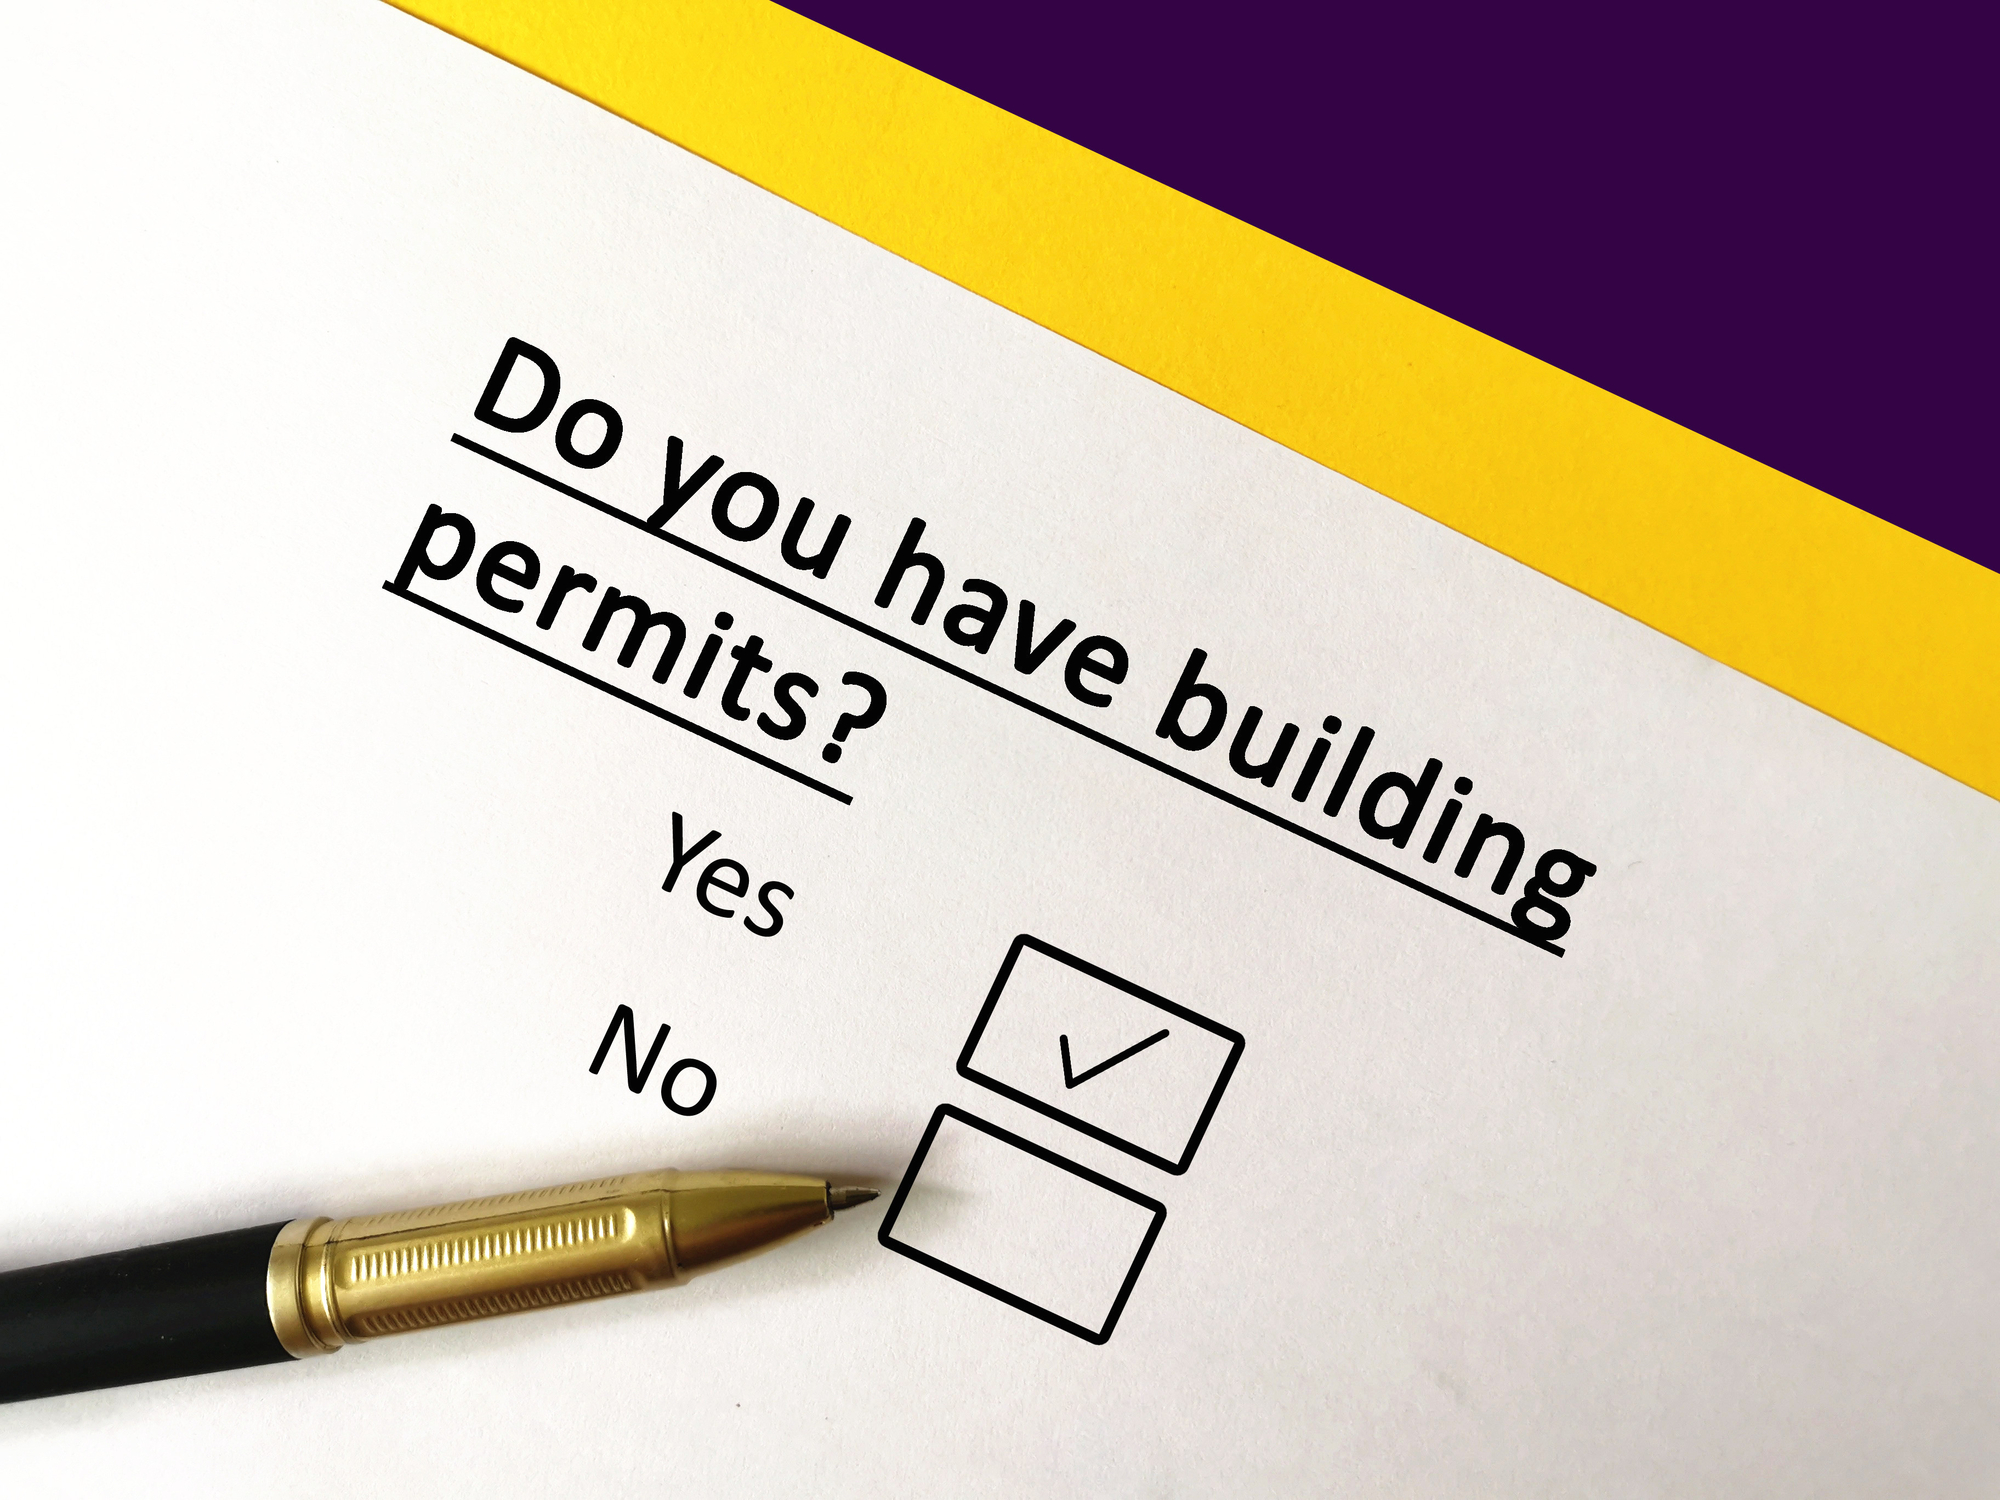 One person is answering question. He has building permits.